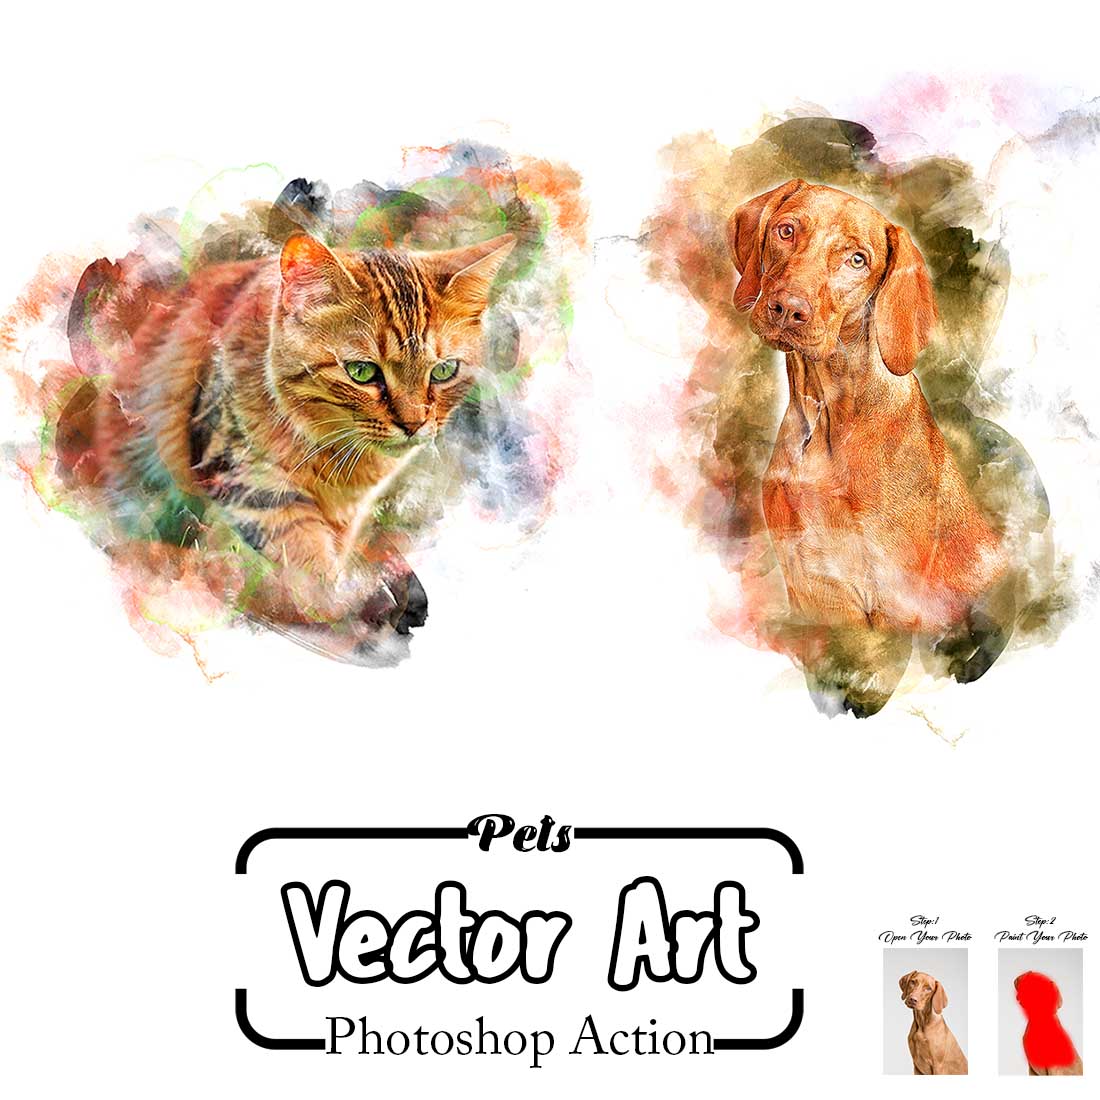 Pets Vector Art Photoshop Action cover image.